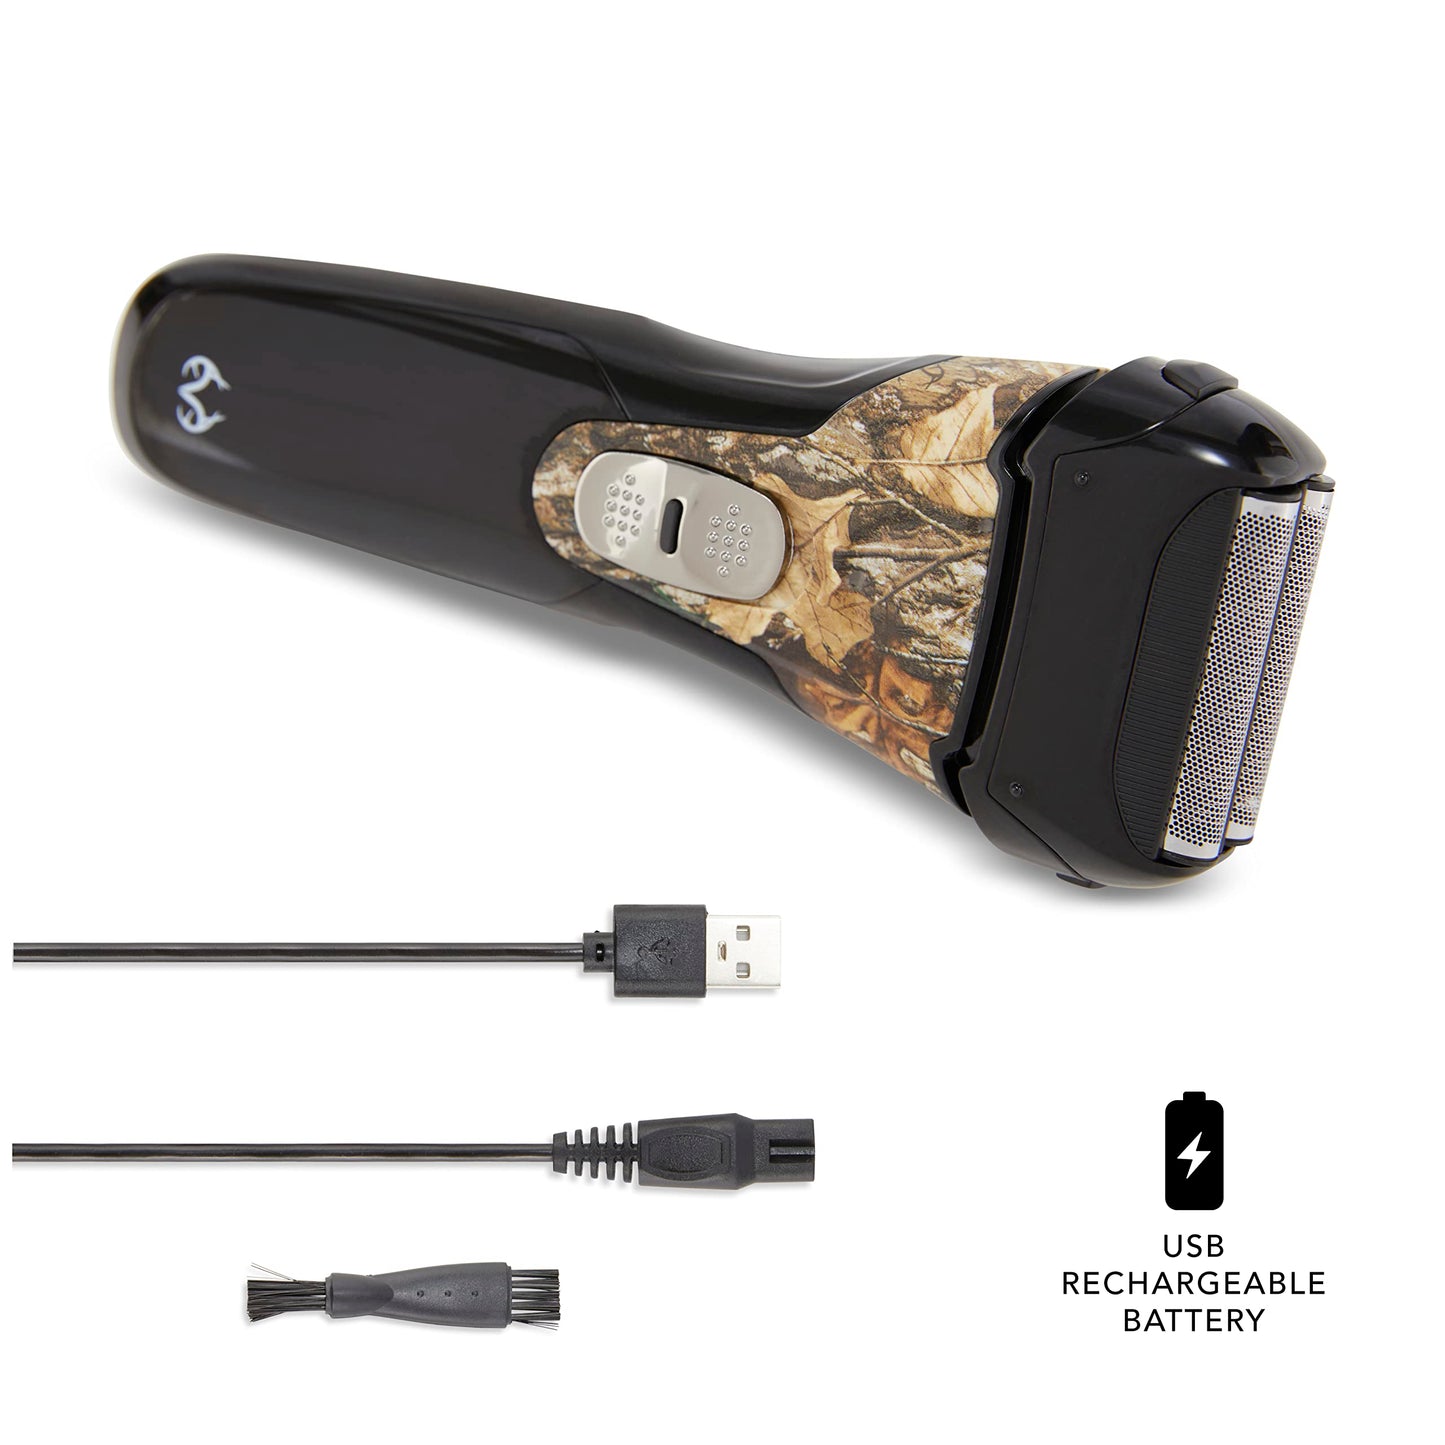 Realtree Premium Electric Shaver for Men’s Beard Shaving, Trimming, and Grooming, Cordless, 2 Blade Foil Shaver, Stainless Steel, USB Rechargeable with Lithium Ion Battery, Wet/Dry Use, LED Display